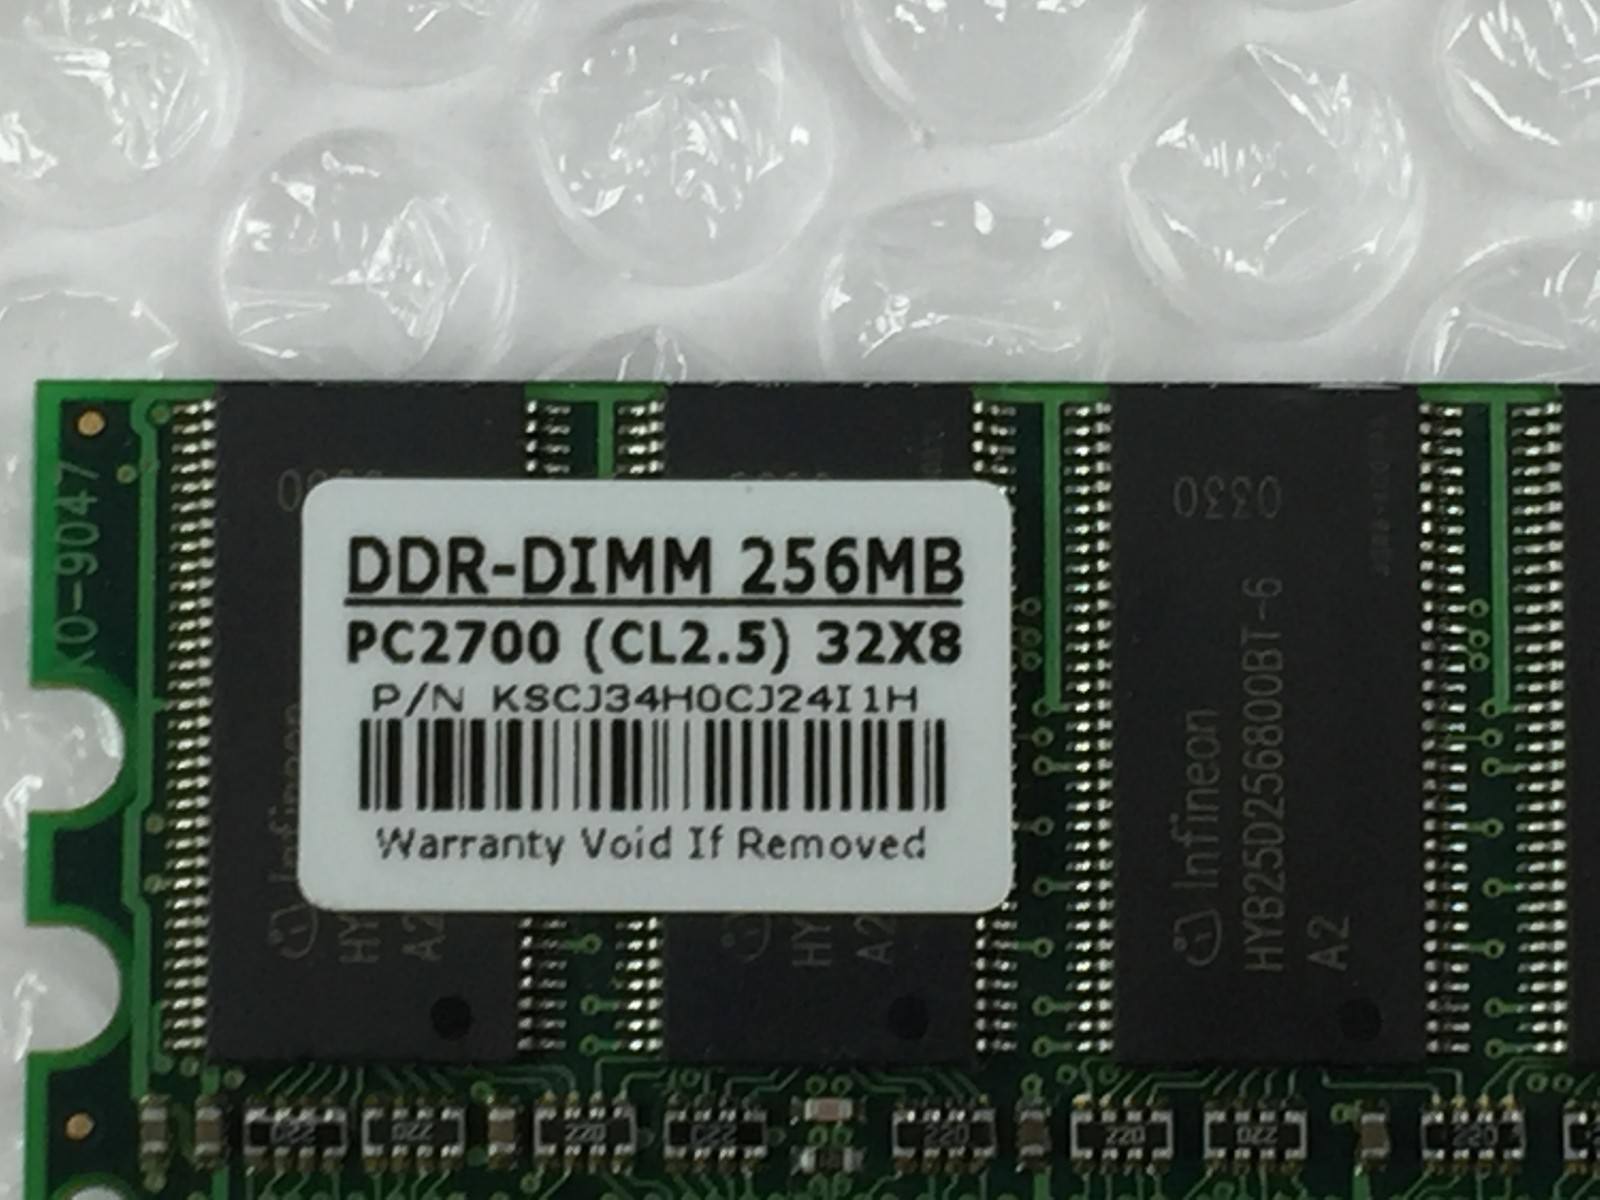 2 Sticks of 256MB DDR-PC2100 and PC2700 CL2.5, M368L3223DTL